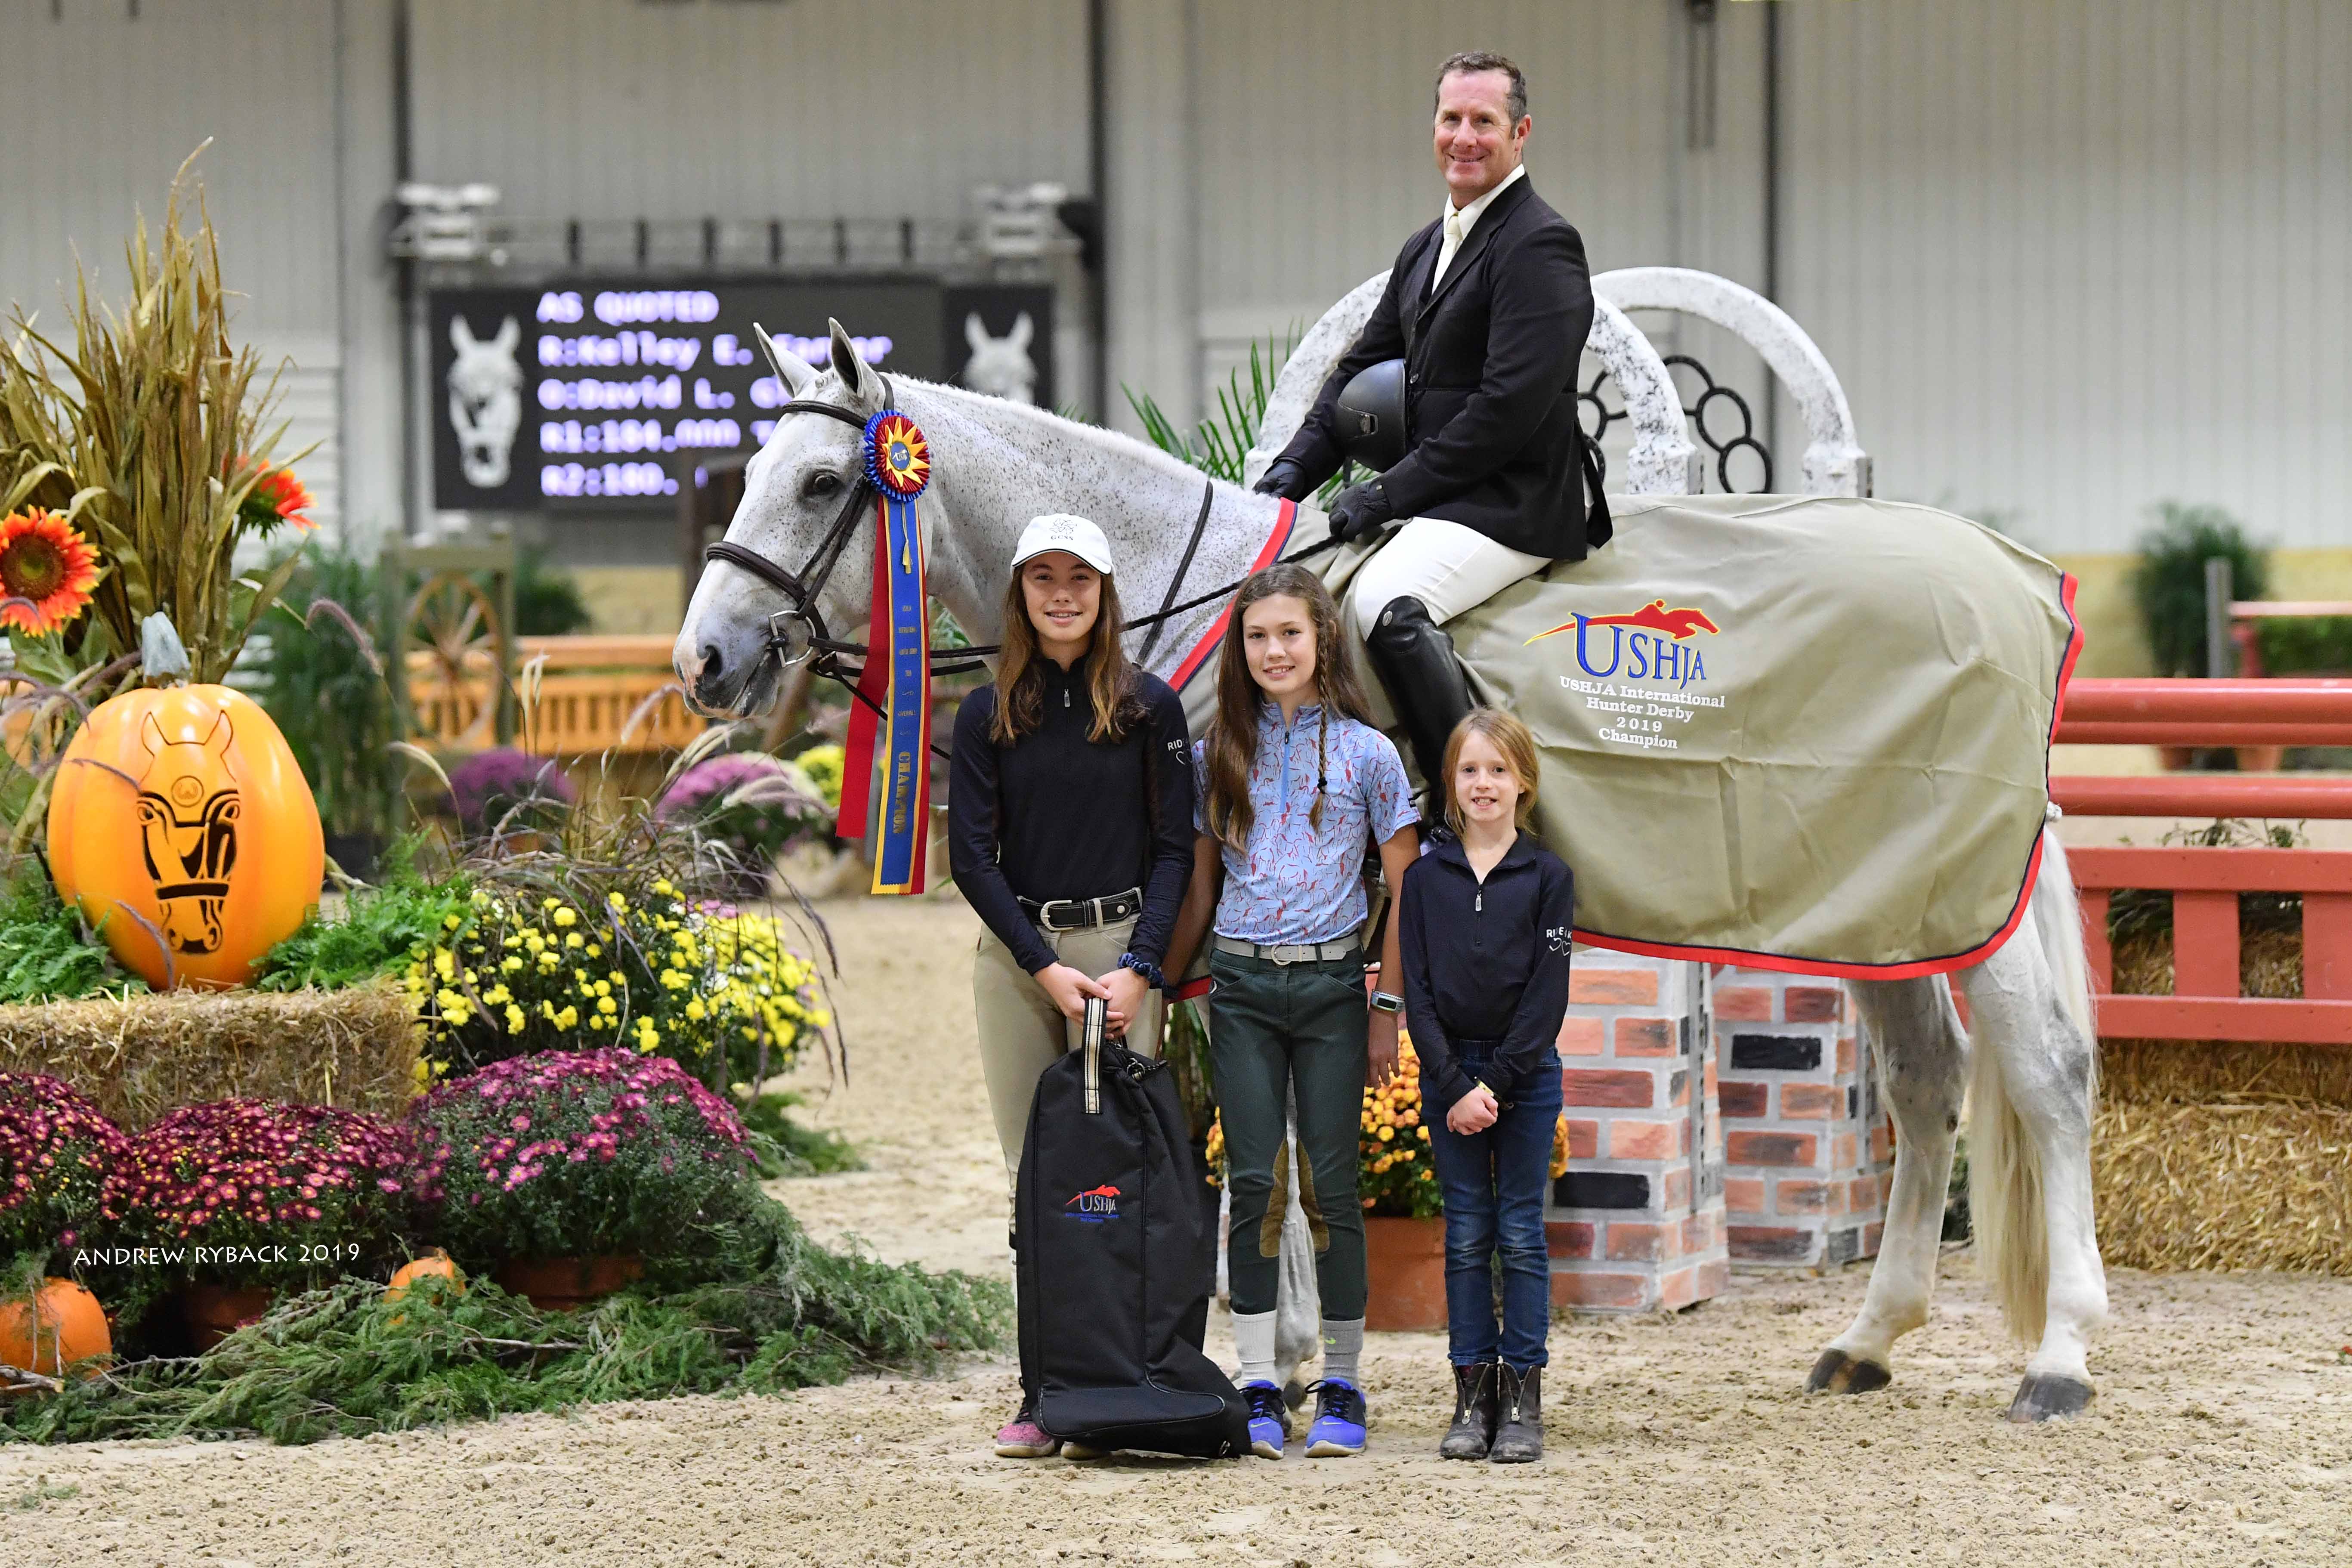 Honors - International Take Crolick $40,000 Corallo USHJA in Derby the Z World and Top Center Equestrian Greg Hunter